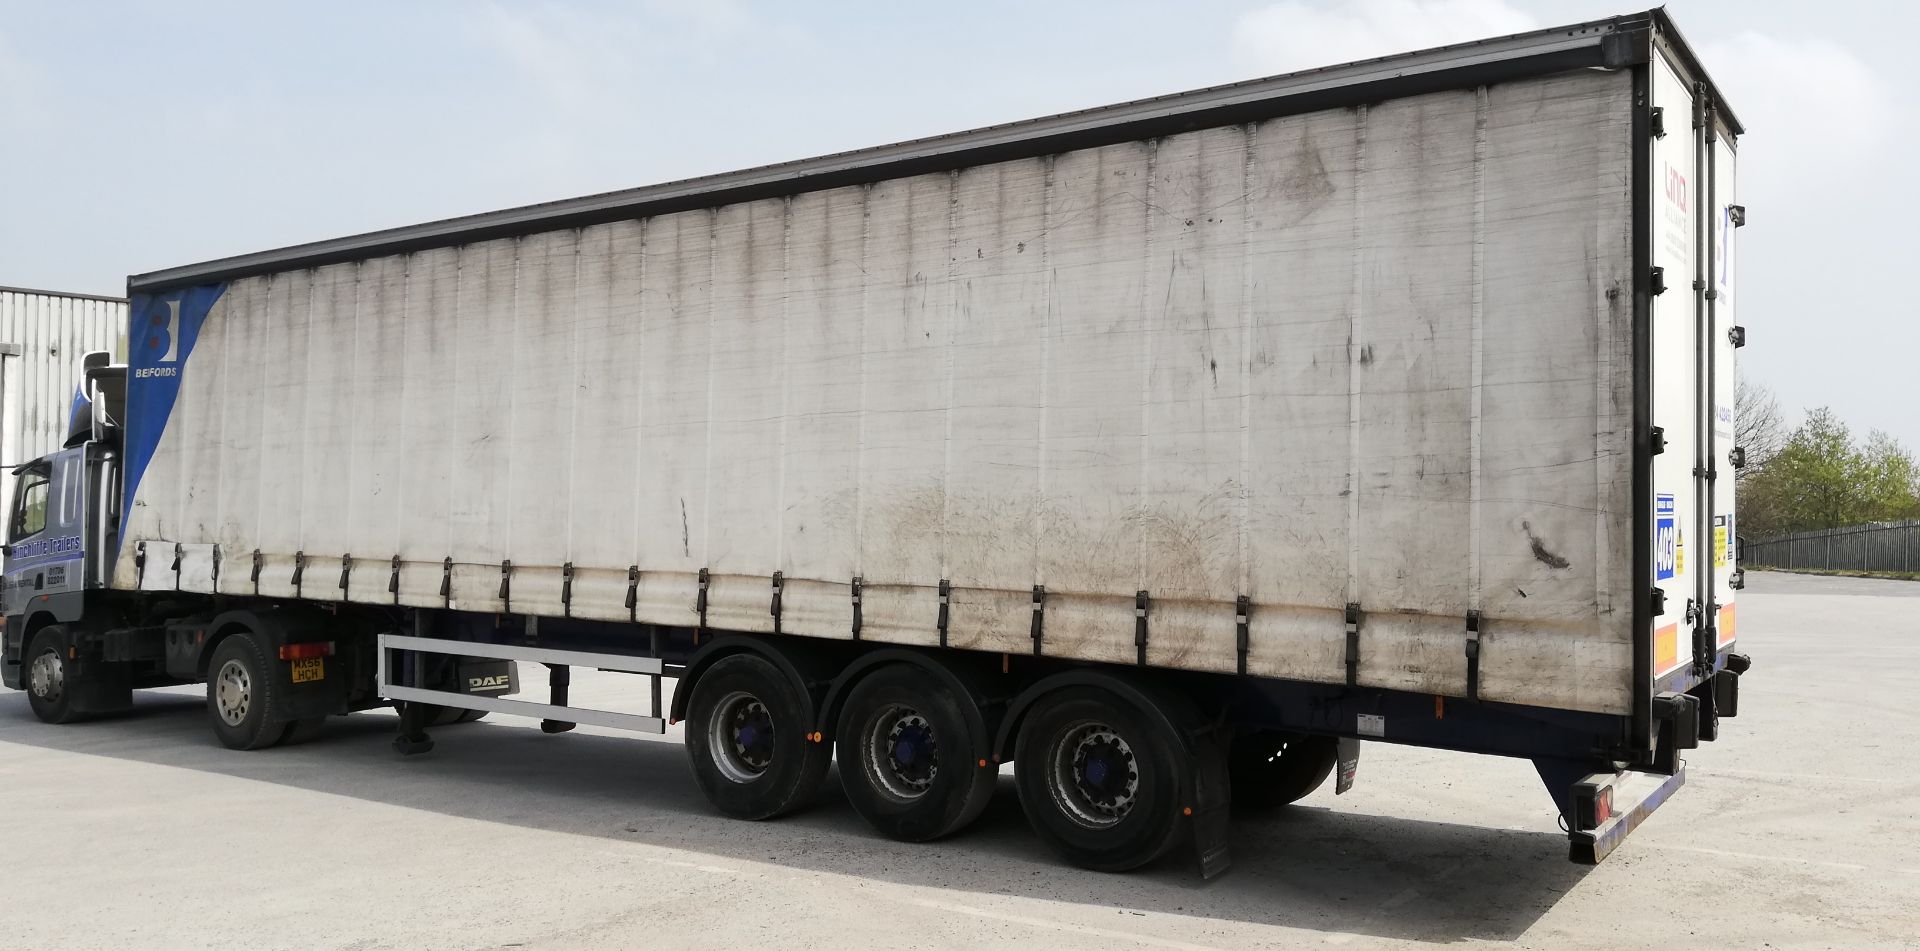 Montracon 13.6m Tri-Axle Curtainside Single Deck Semi-Trailer, chassis no. 101240, ID no. C317904, - Image 3 of 6